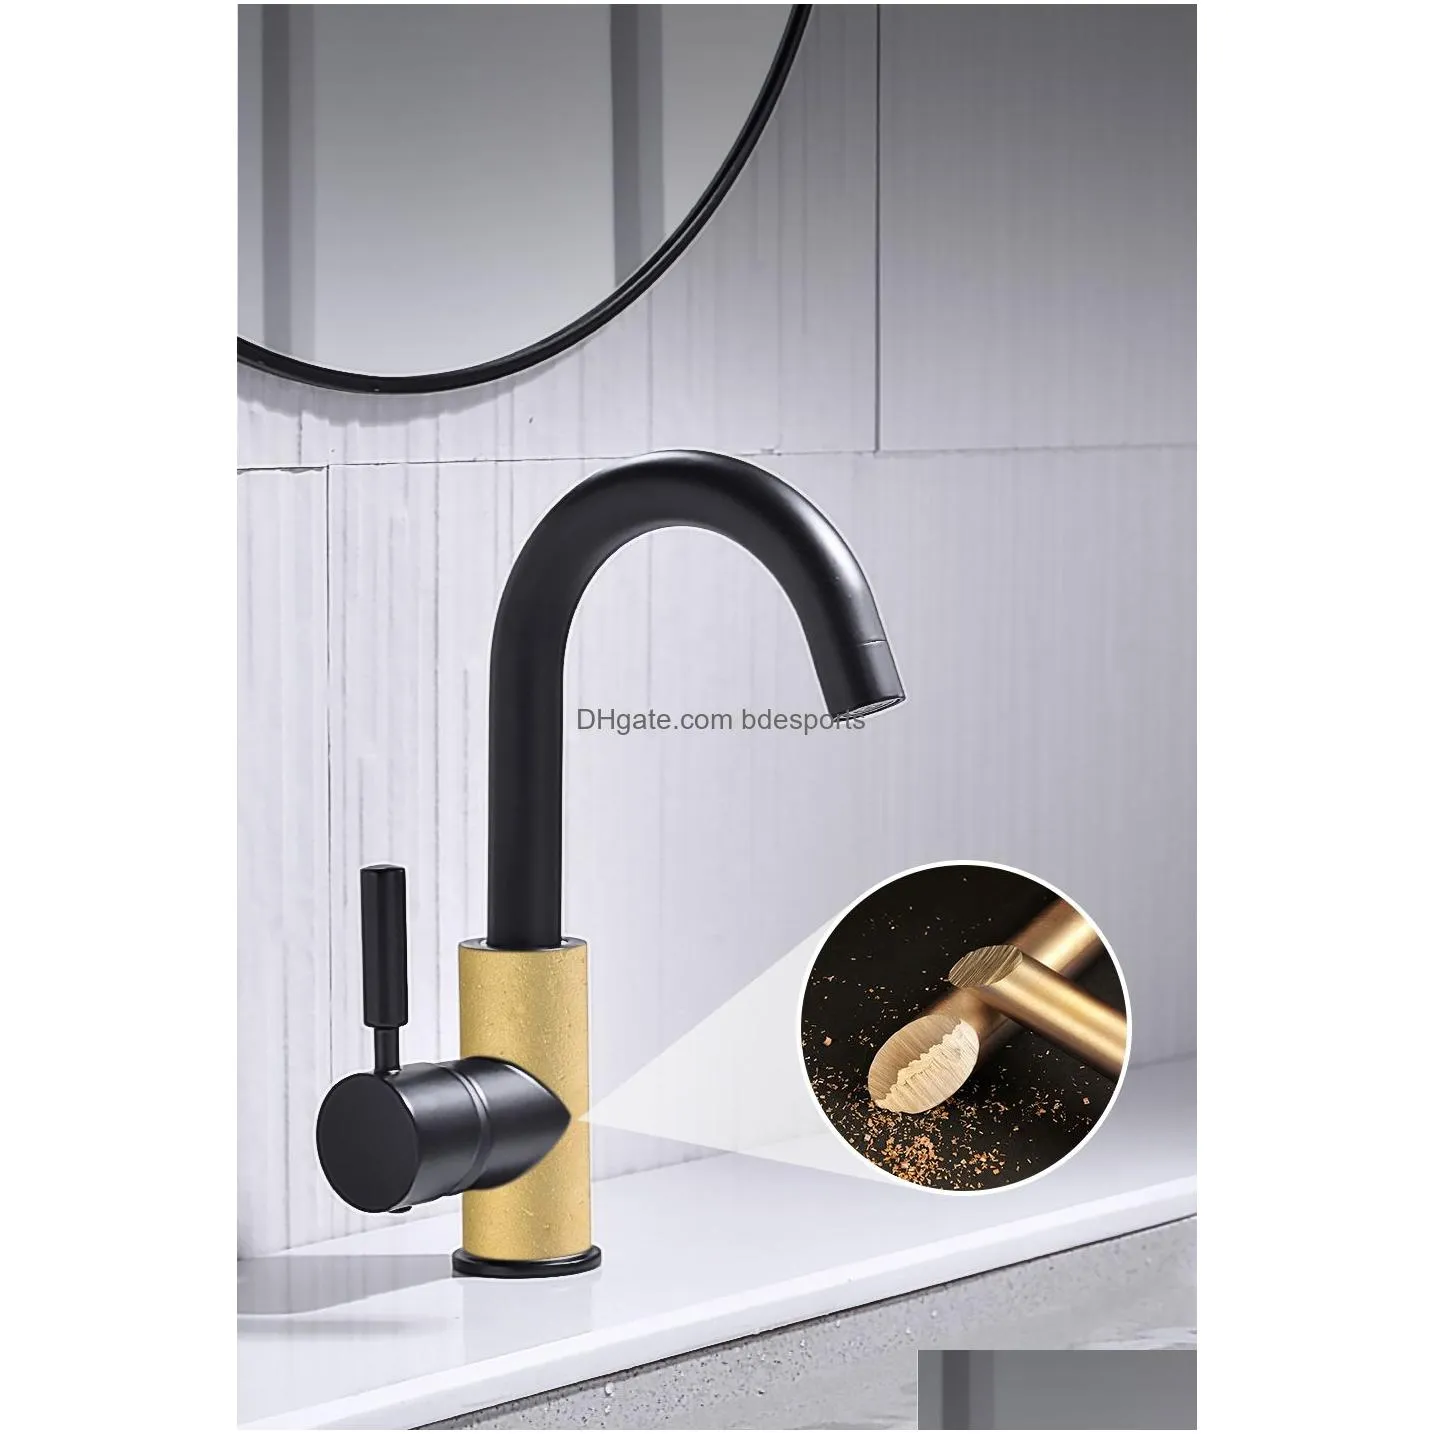 Bathroom Sink Faucets Brass Black Bathroom Basin Faucet Cold And Water Mixer Sink Tap Nickel Brushed Gold Rose Bronze Taps With  Up Dhoey